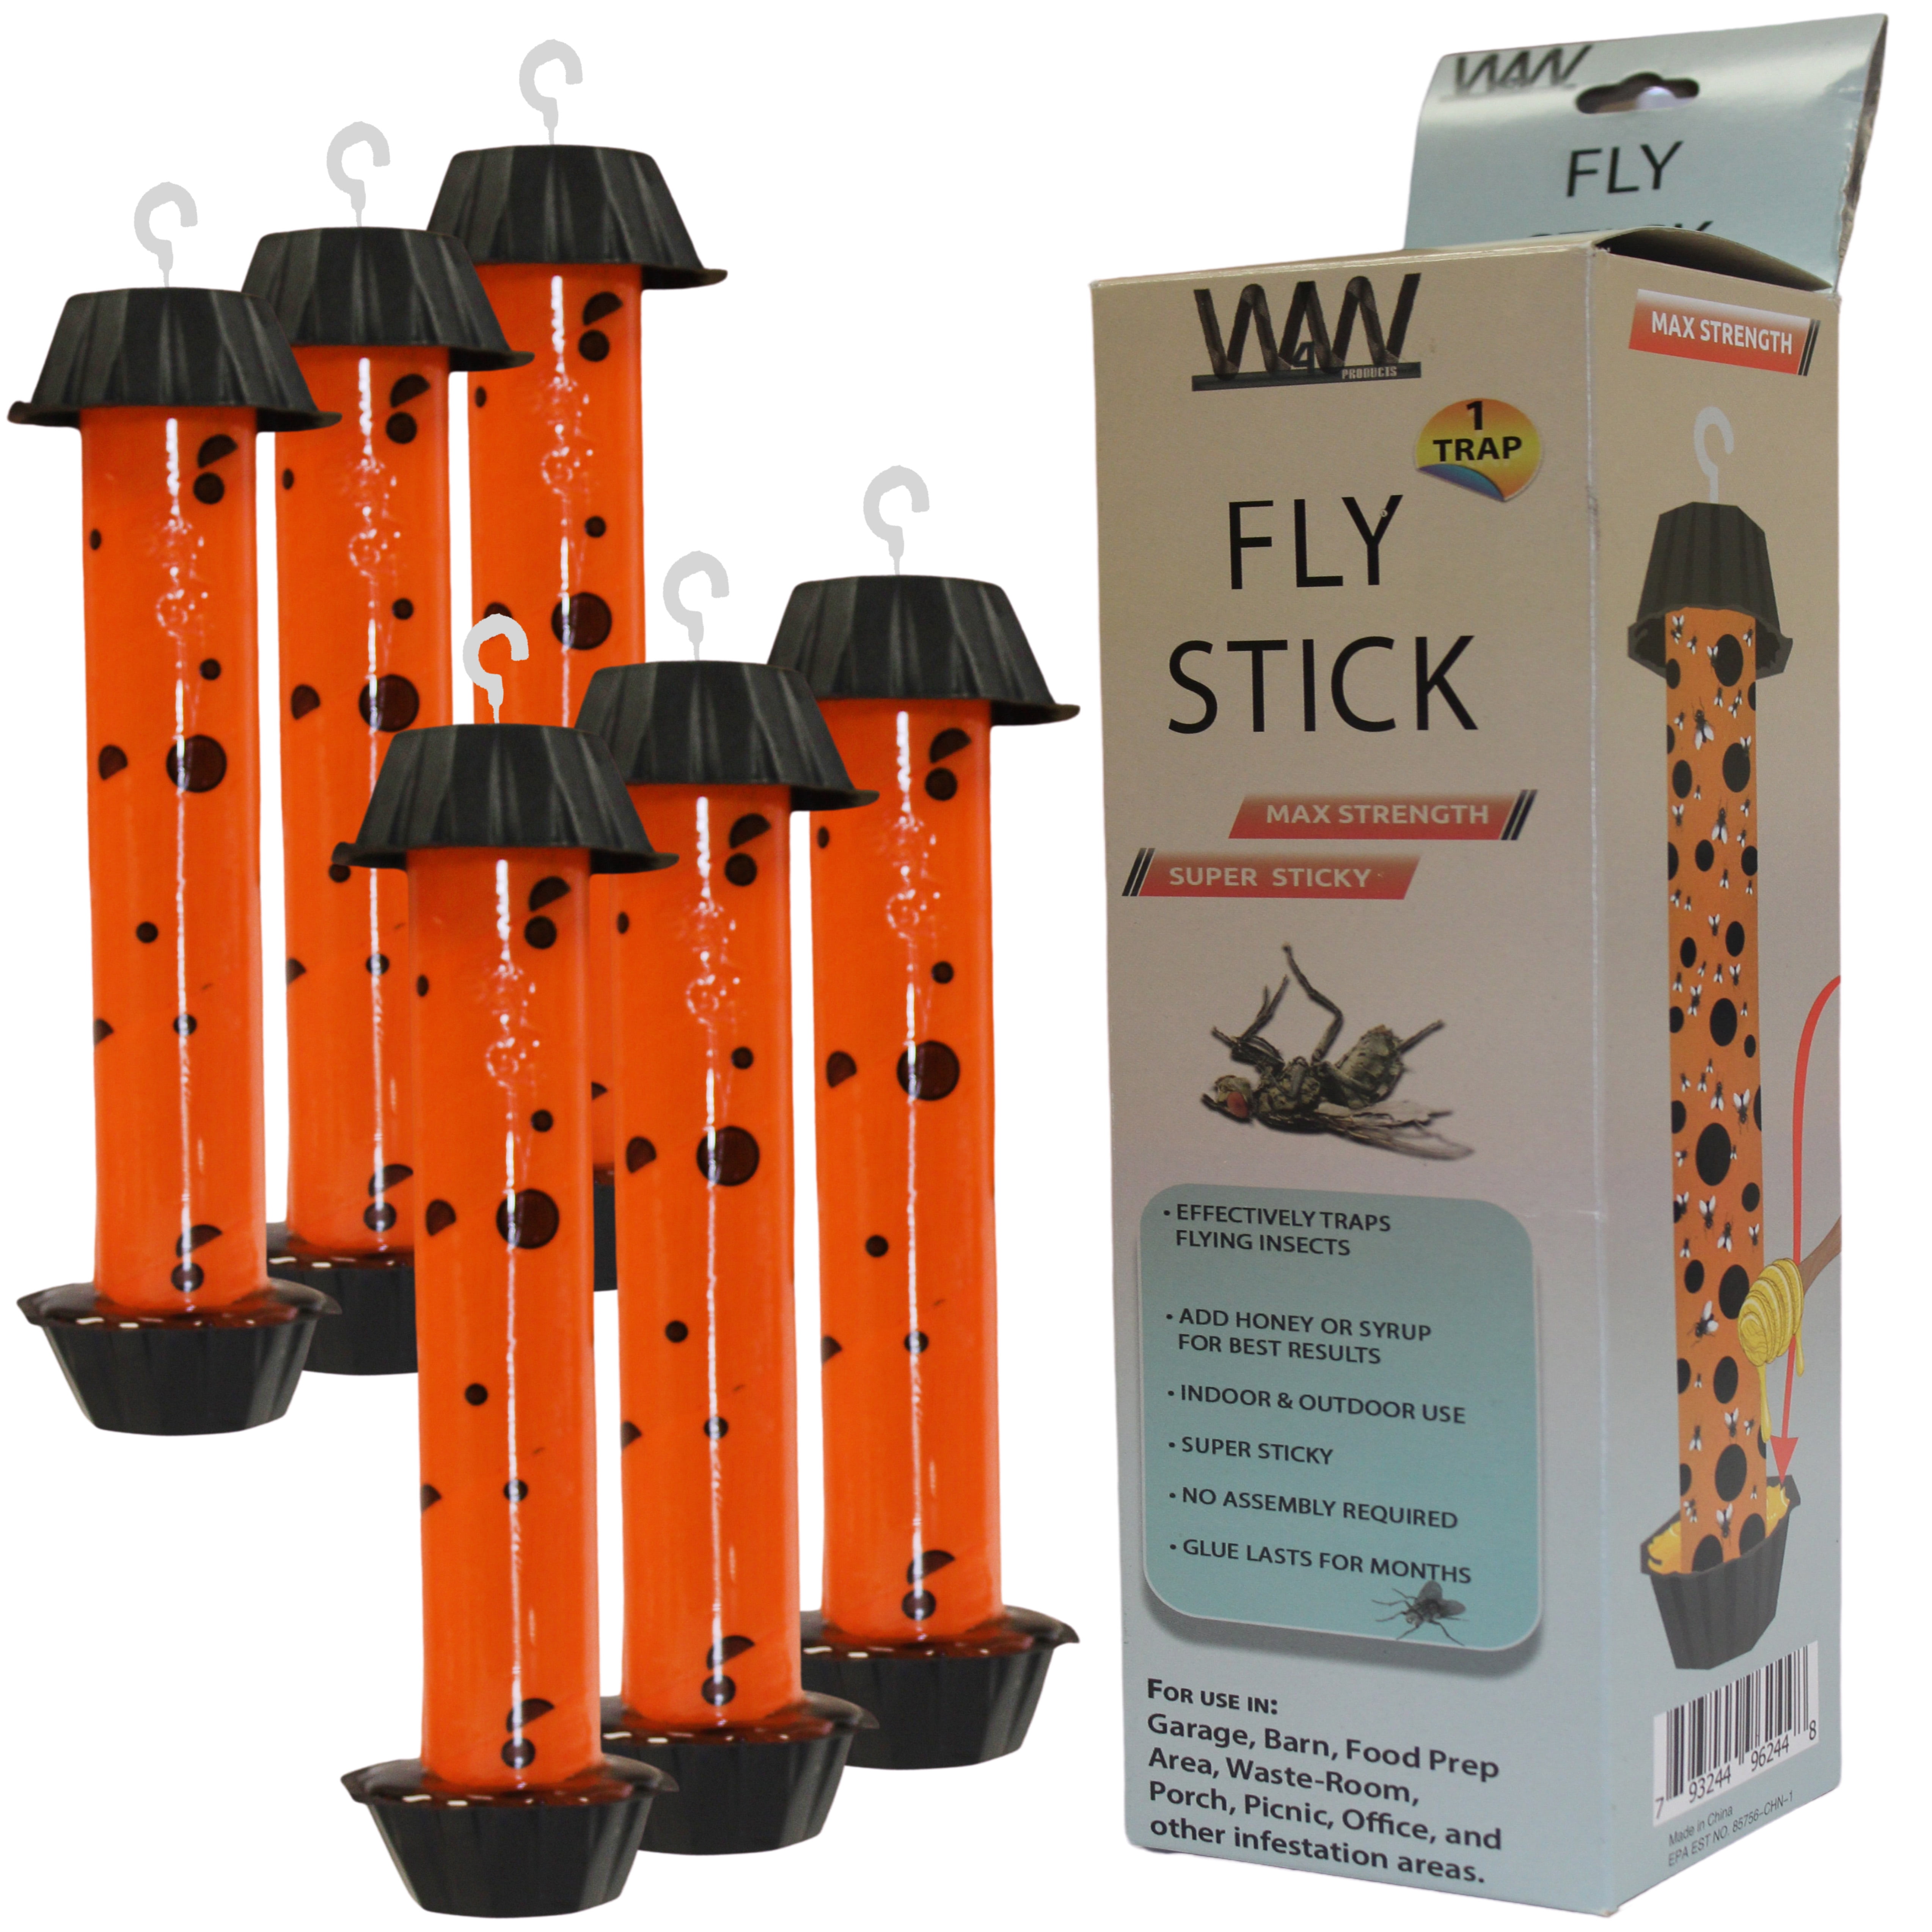 W4W Jumbo Fly Stick- Super Sticky Fly Trap, Bugs Flies & Insects